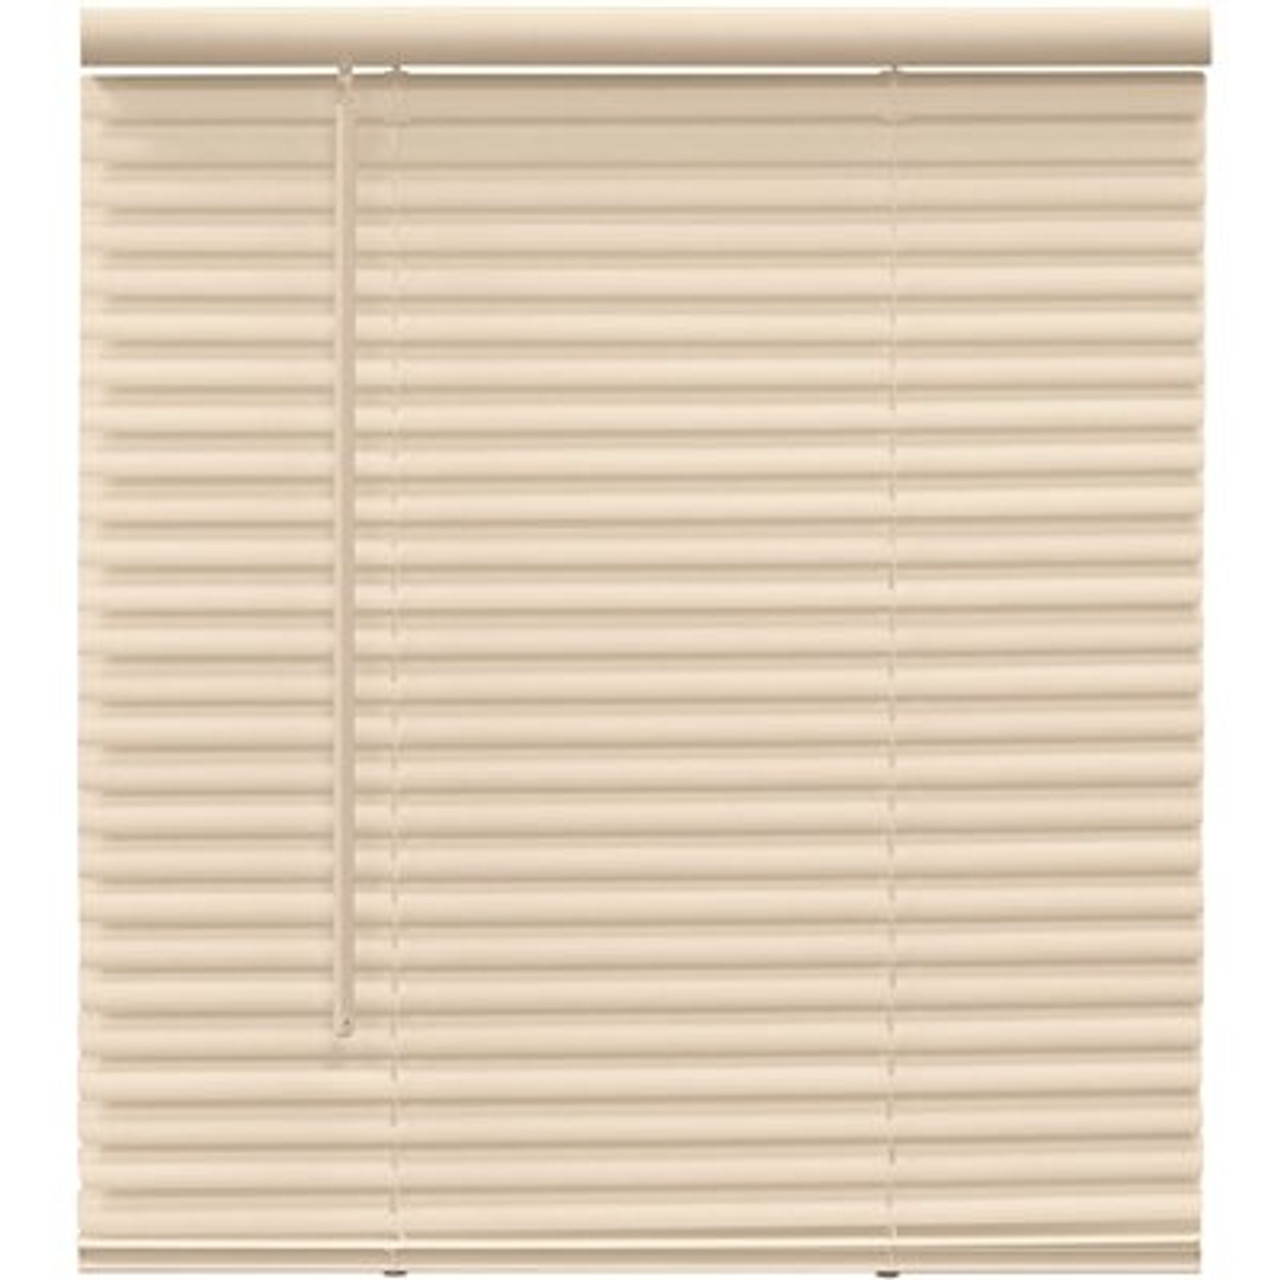 Champion Trutouch Alabaster Cordless Light Filtering Vinyl Mini Blinds With 1 In. Slats 70 In. W X 64 In. L